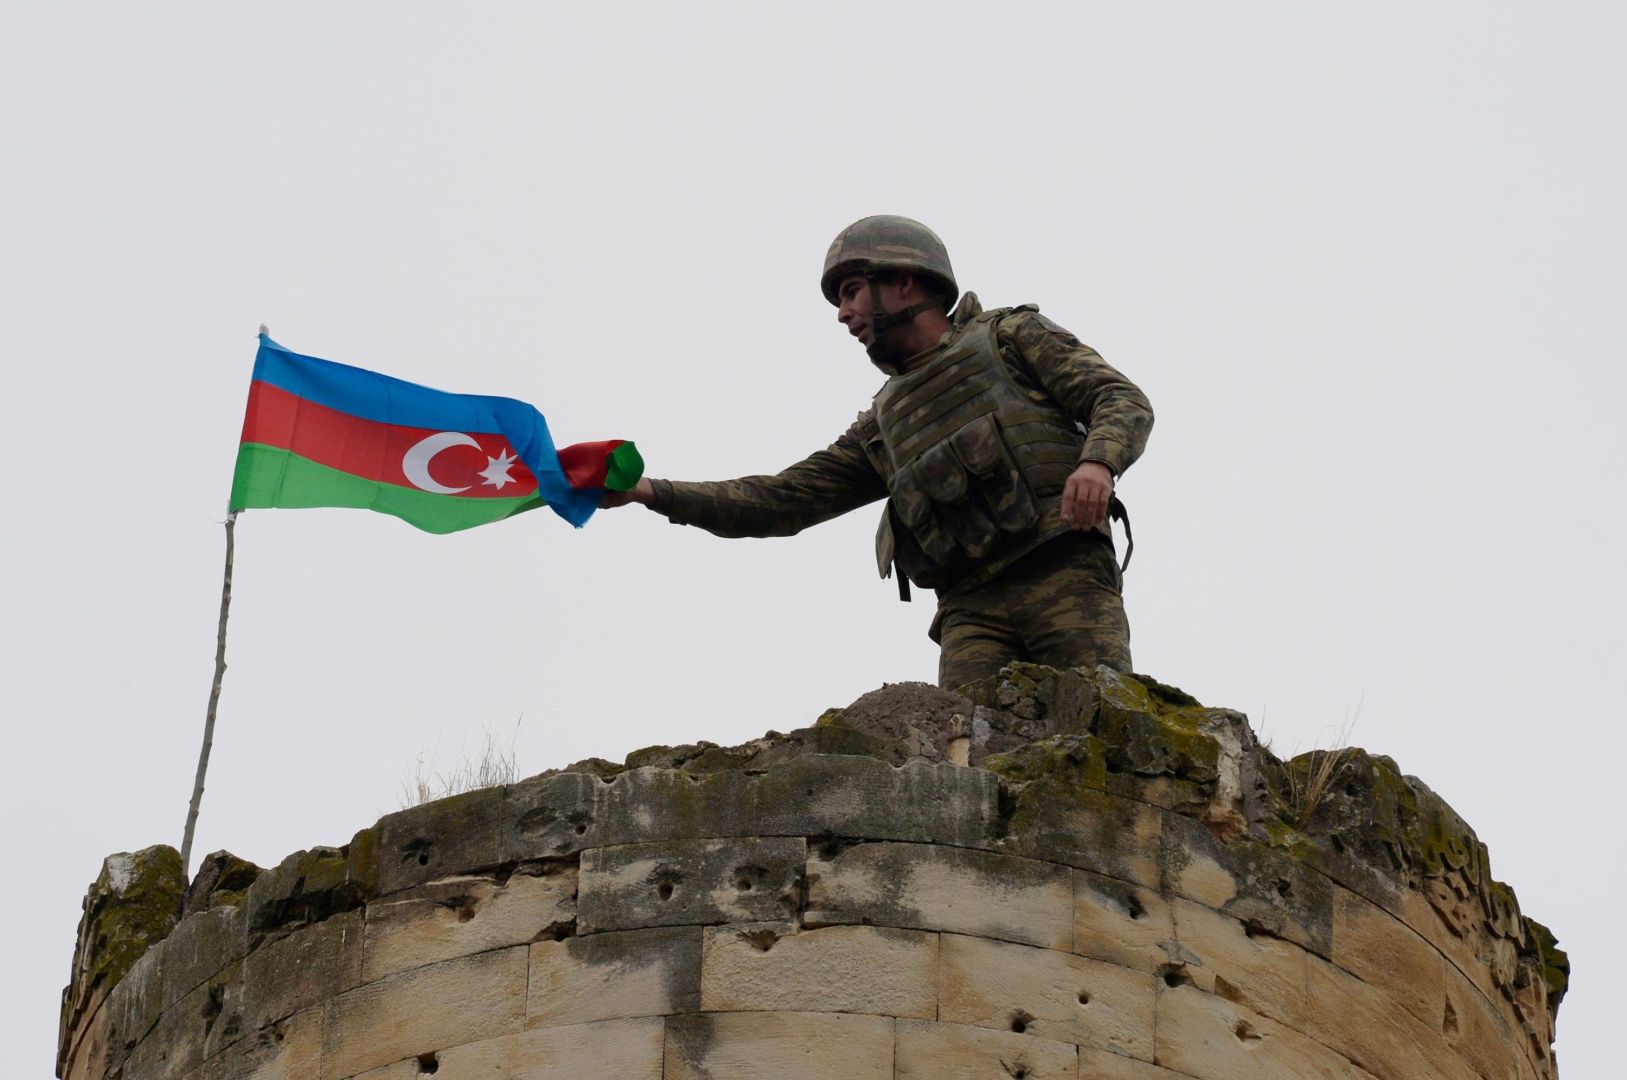 Situation in Garabagh showcases true position of anti-Azerbaijan parties